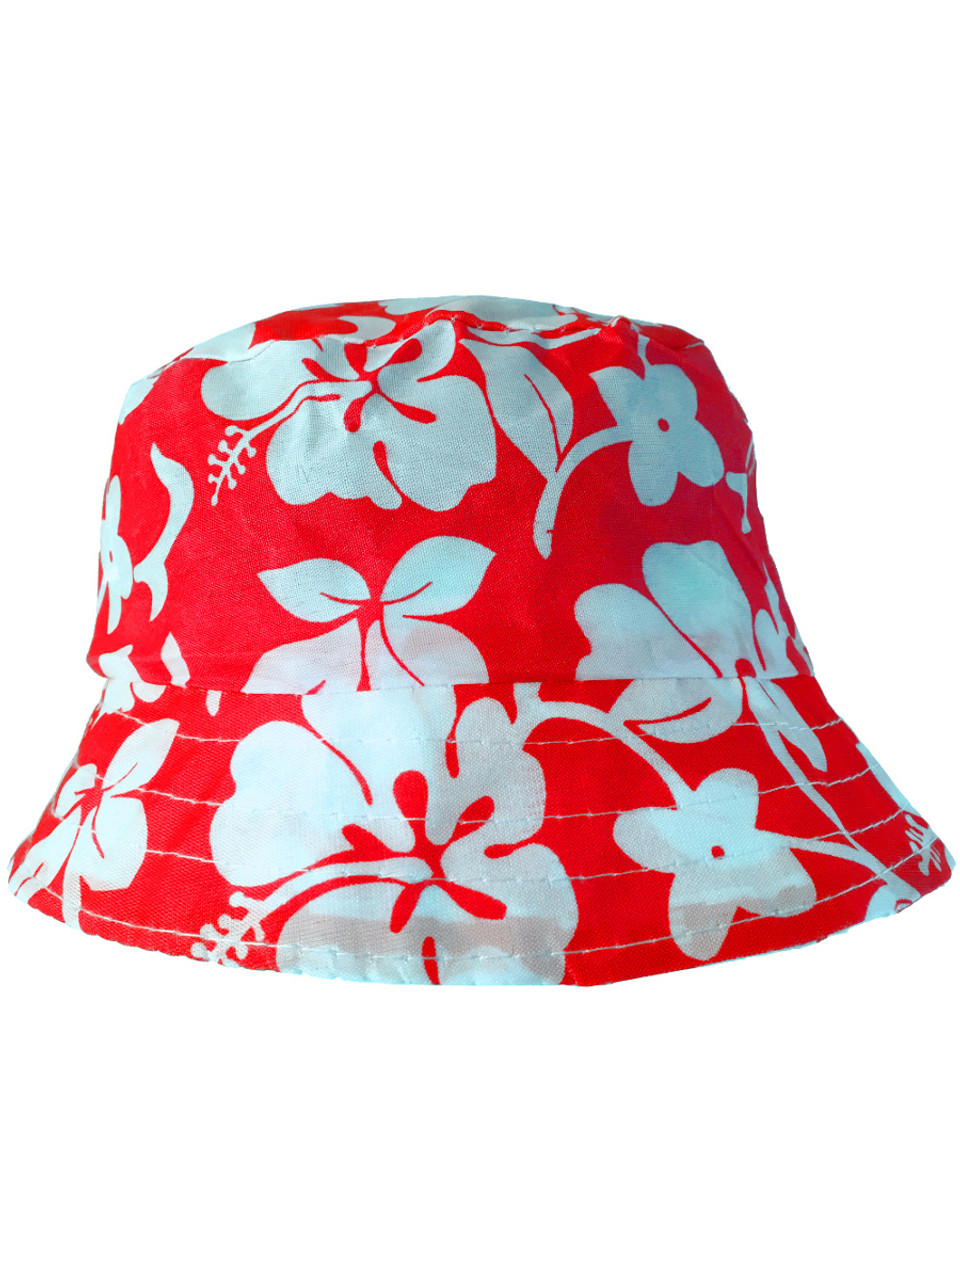 Red and White Hawaiian Hibiscus Printed Bucket Hat